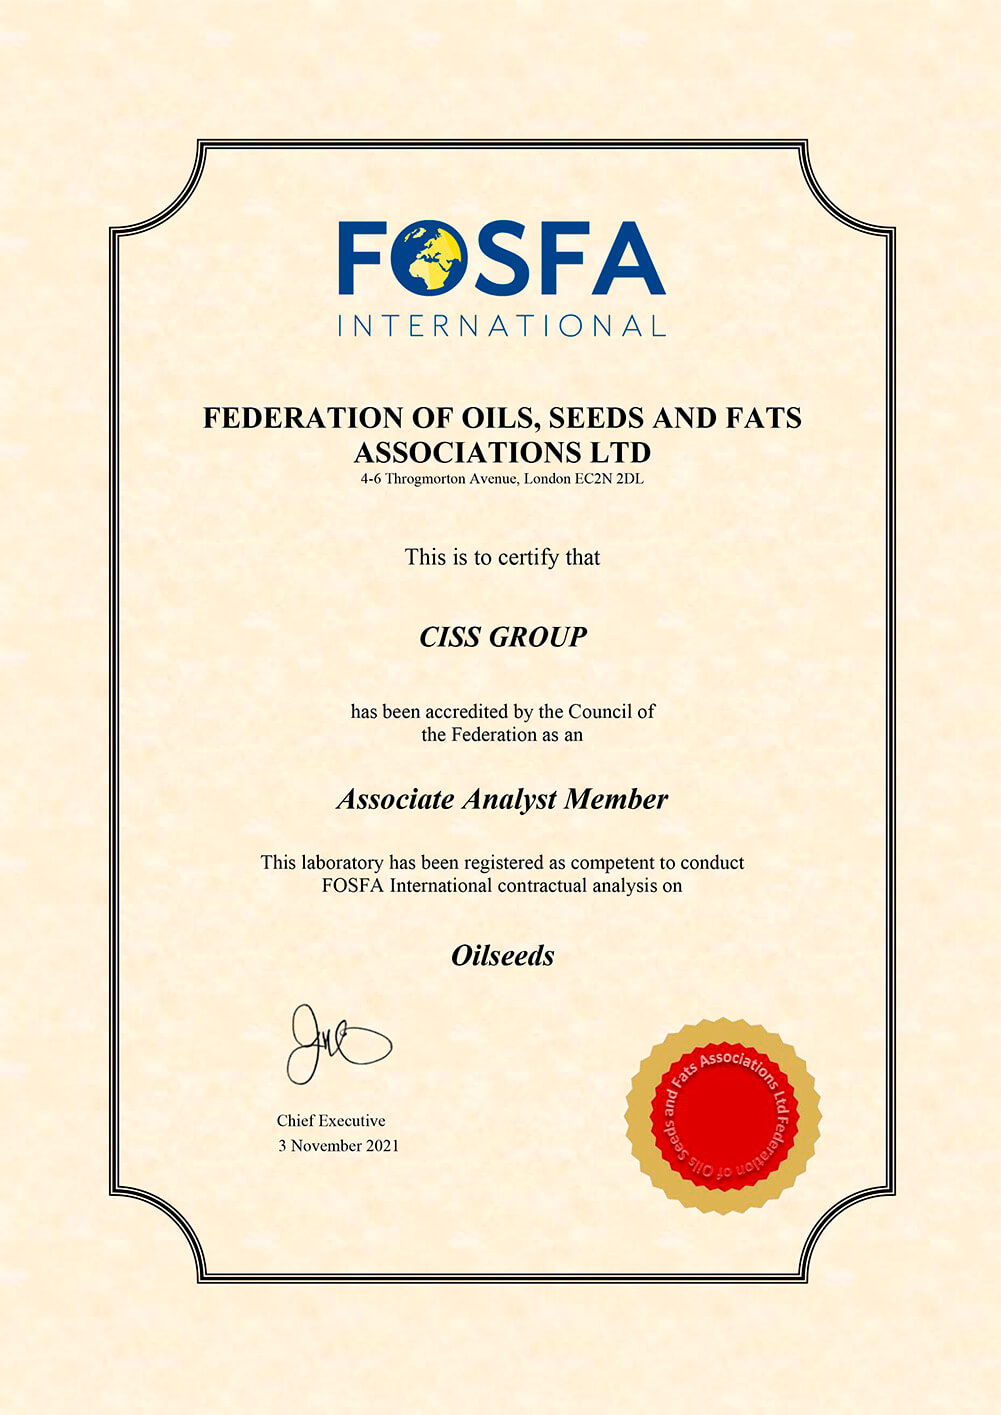 FOSFA accreditation as Associate Analyst Member in Oilseeds section